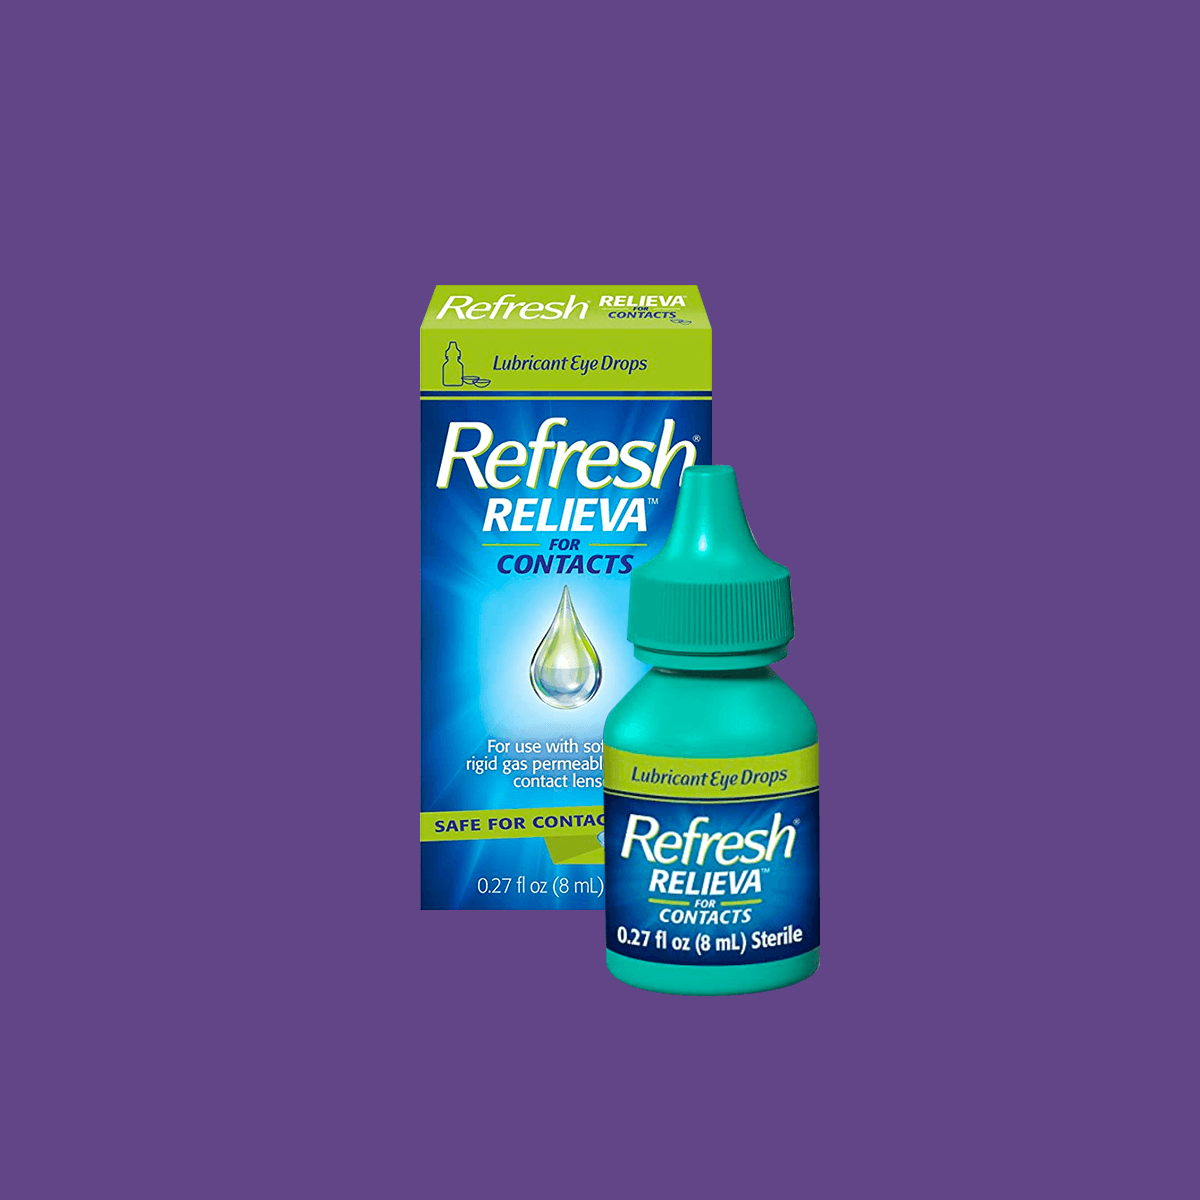 Refresh Relieva for Contacts (8 mL Bottle) - DryEye Rescue Store